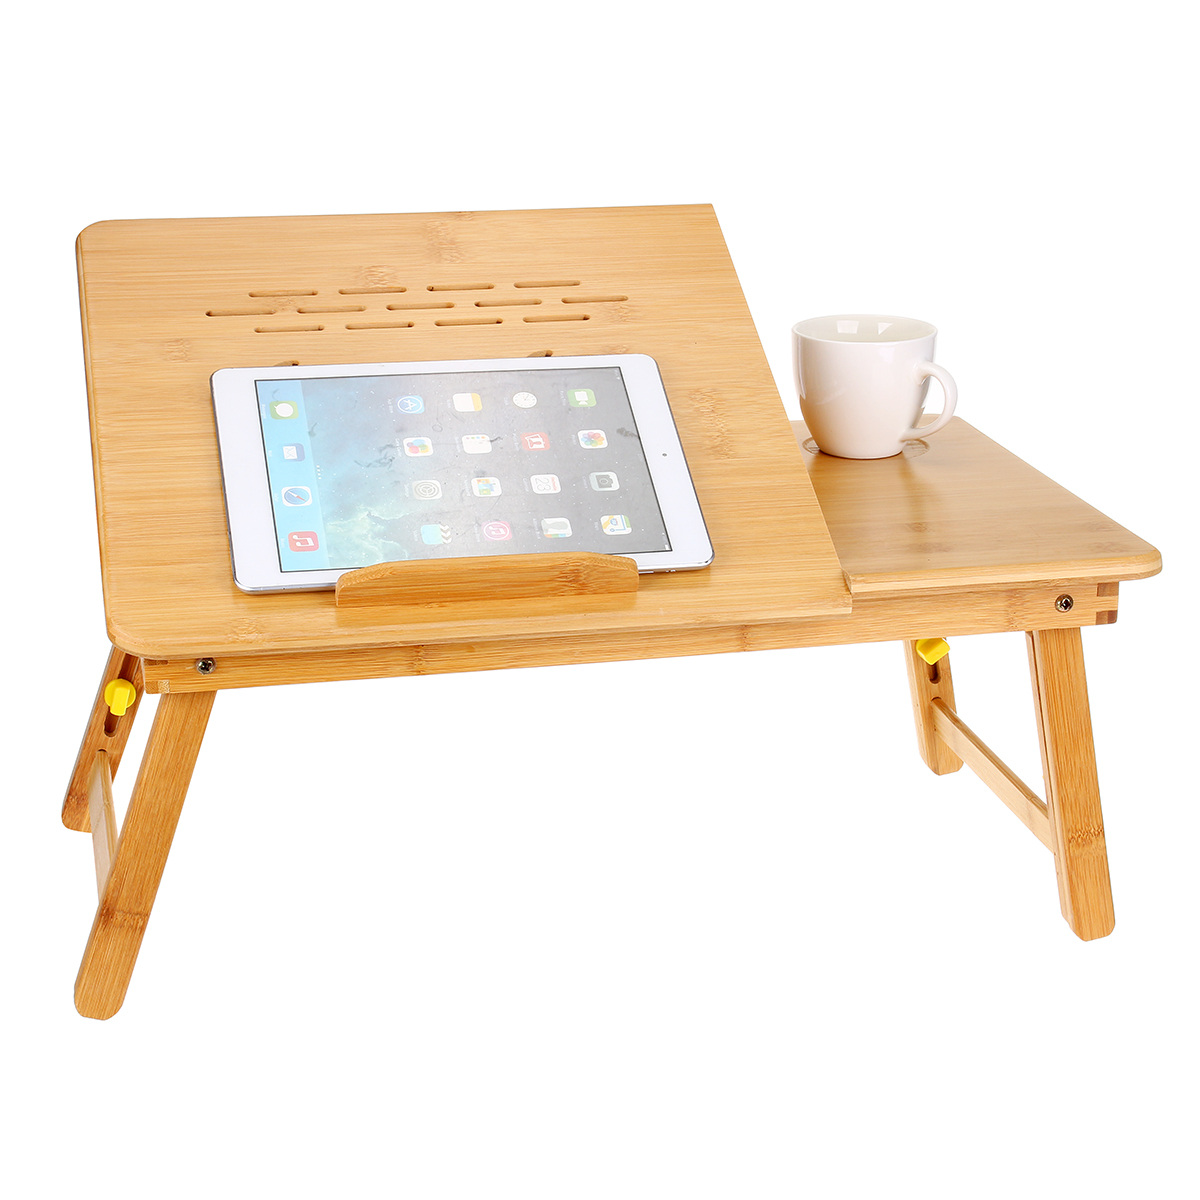 Adjustable-Laptop-Desk-Stand-Foldable-Notebook-Table-Sofa-Bed-Tray-Computer-Desk-1805023-6